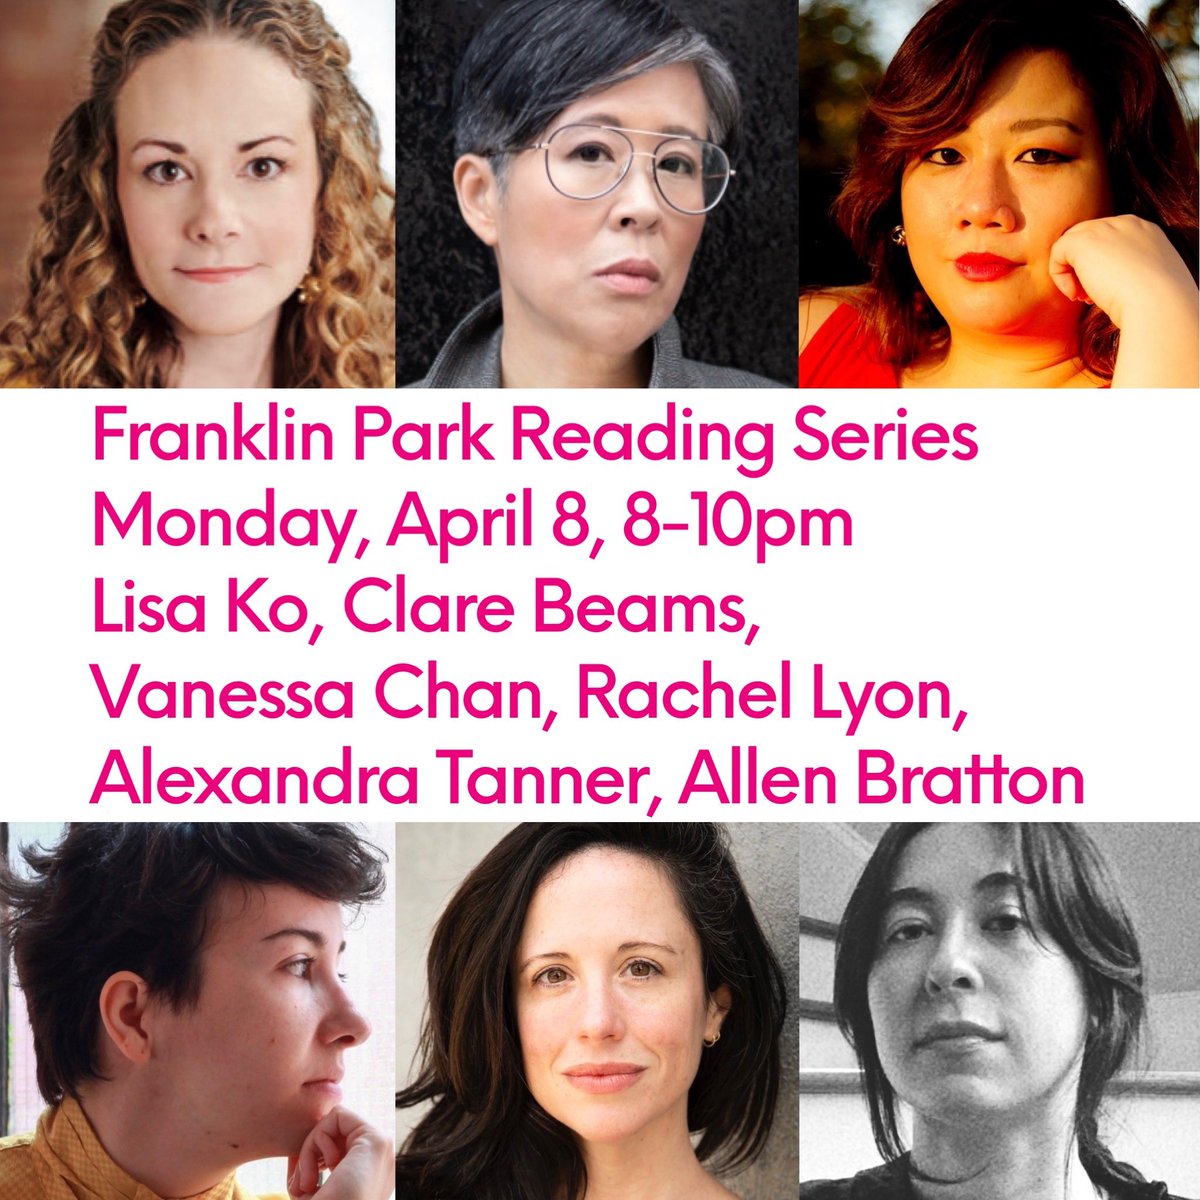 One week away—Monday, April 8: Can’t wait to host @iamlisako, @clarebeams, @vanjchan, Rachel Lyon, @alex___tanner, and @allenbratton at @FranklinParkBK in a showcase of some of the season’s best fiction! fb.me/e/1qtLbnGLe #Free #crownheights